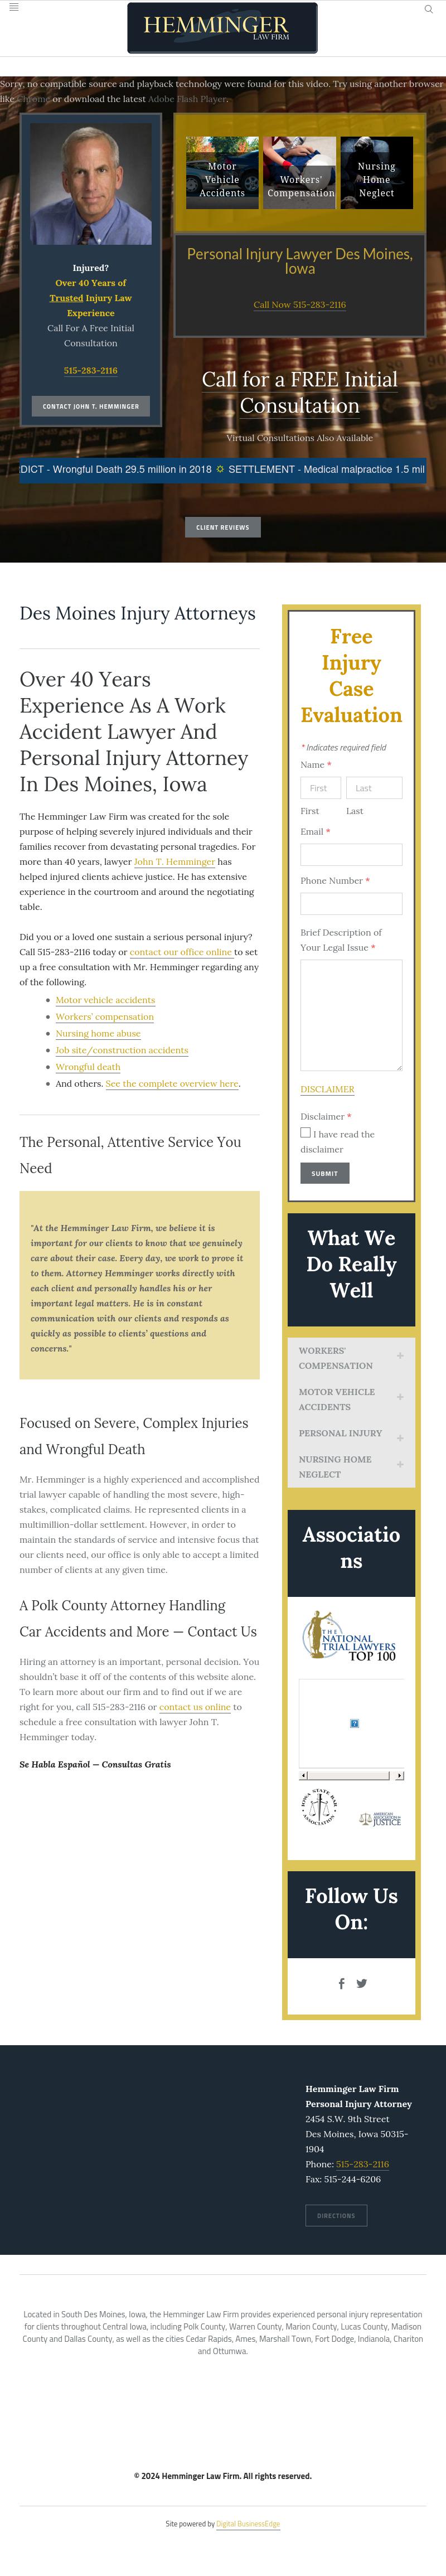 Hemminger Law Firm - Des Moines IA Lawyers